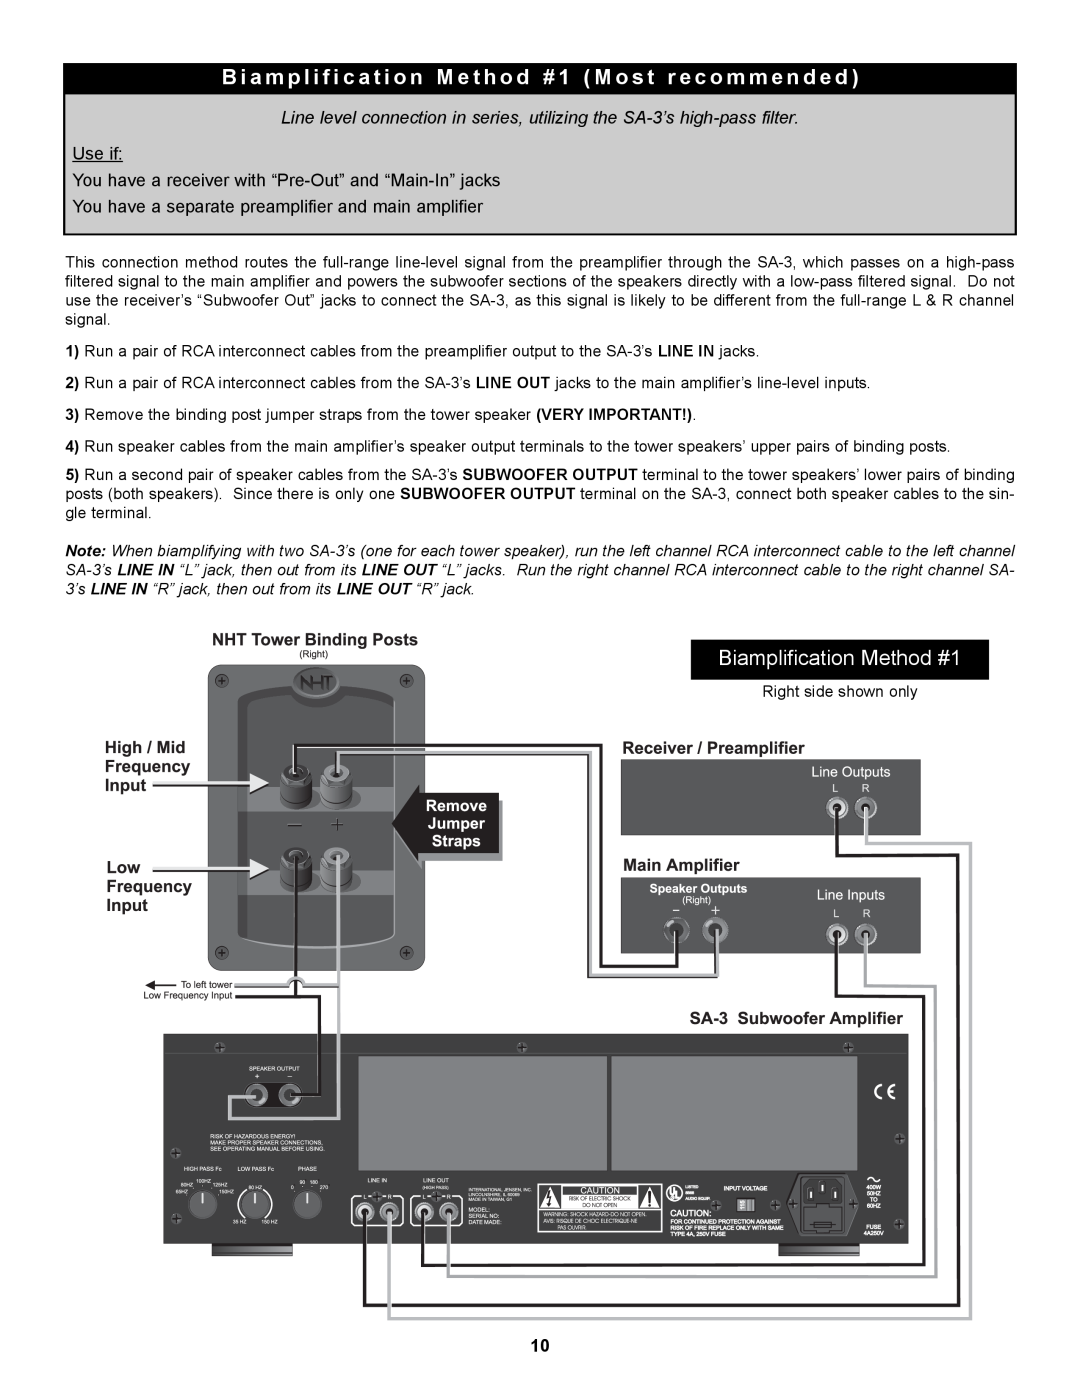 NHT SA-3 owner manual Biamplification Method #1, Use if You have a receiver with “Pre-Out” and “Main-In” jacks 